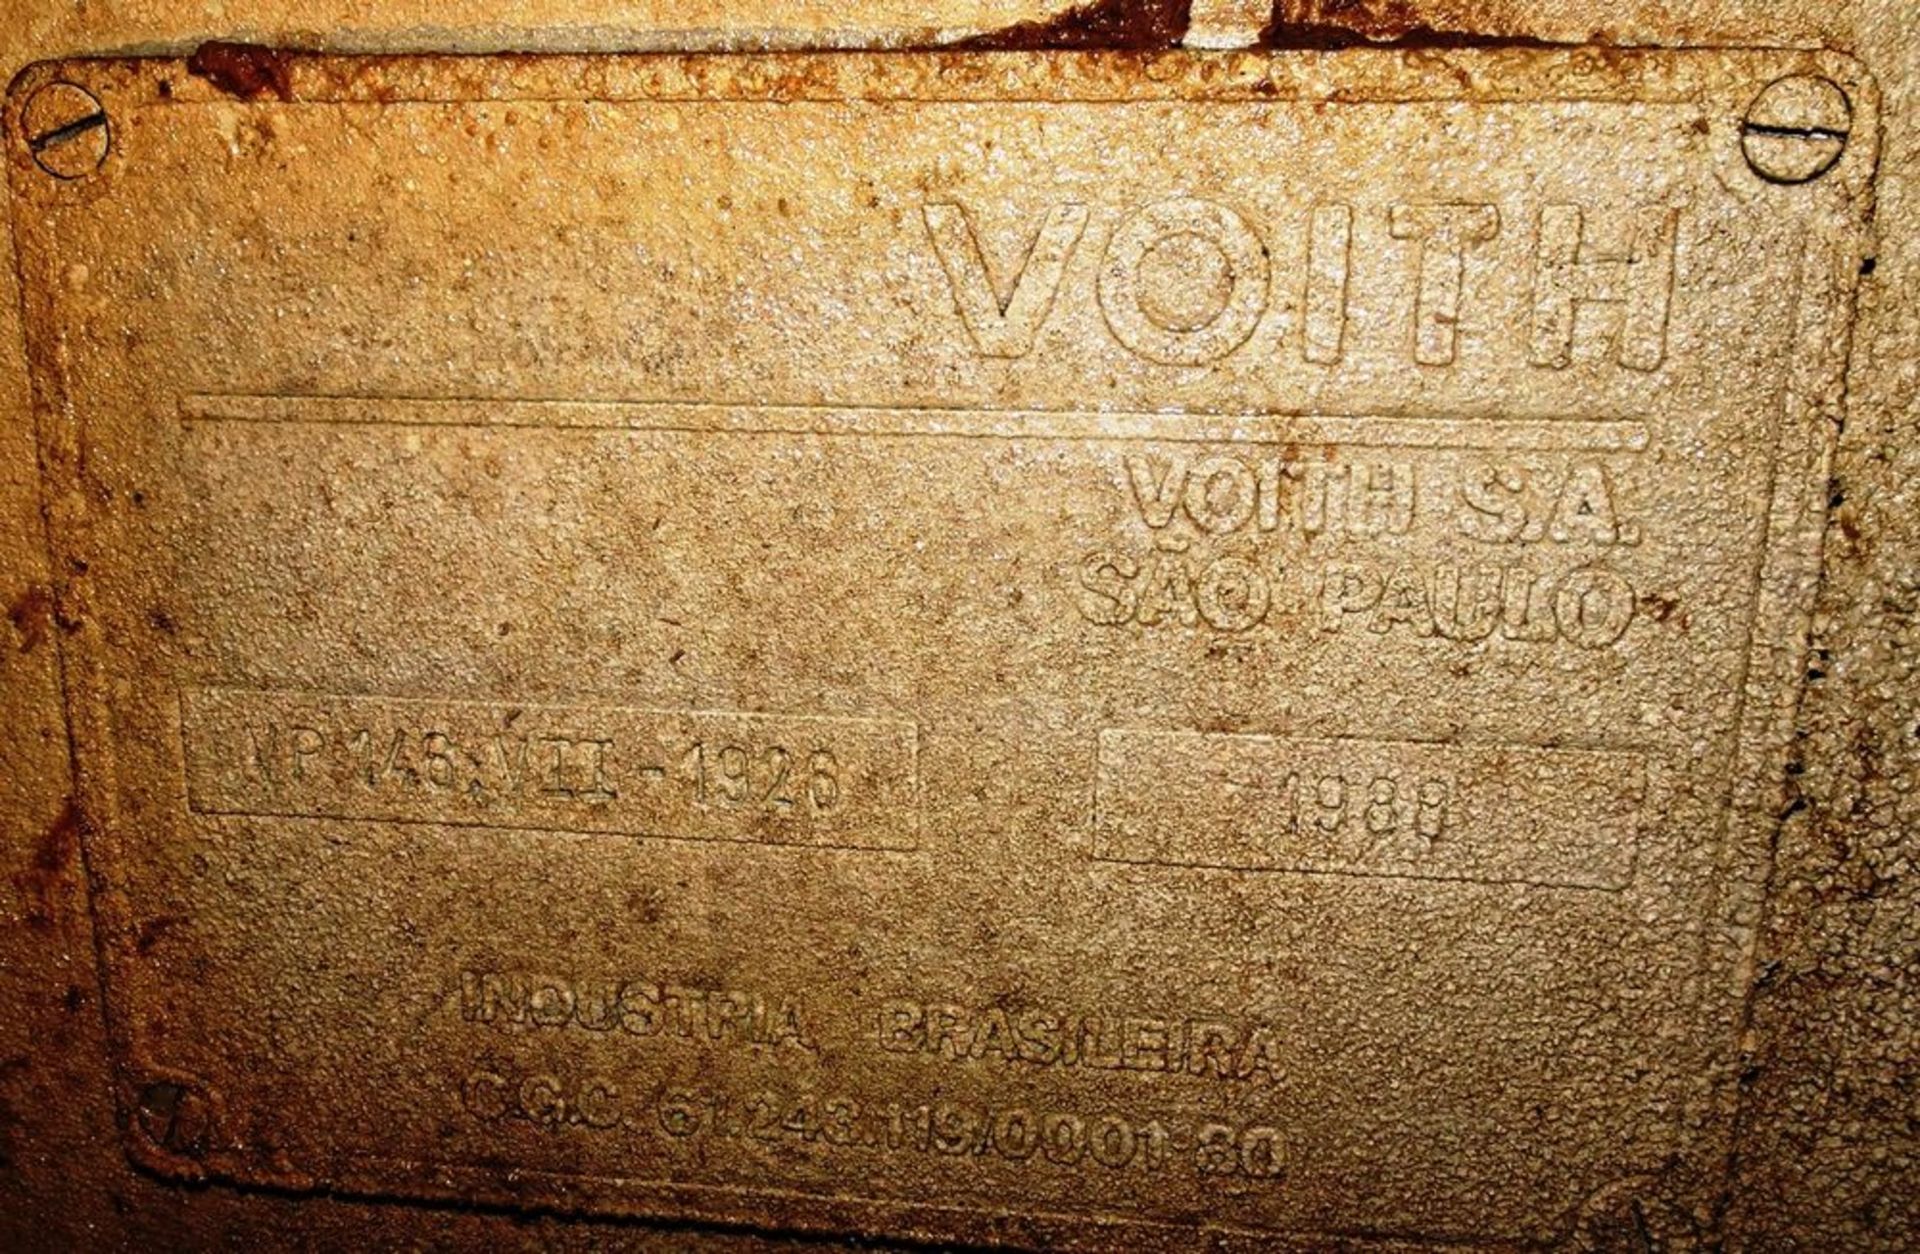 VOITH 104" TRIM YANKEE TISSUE MILL - NOTE: TO BE SOLD BY PRIVATE TREATY, CONTACT AUCTIONEER DIRECT - Image 13 of 273